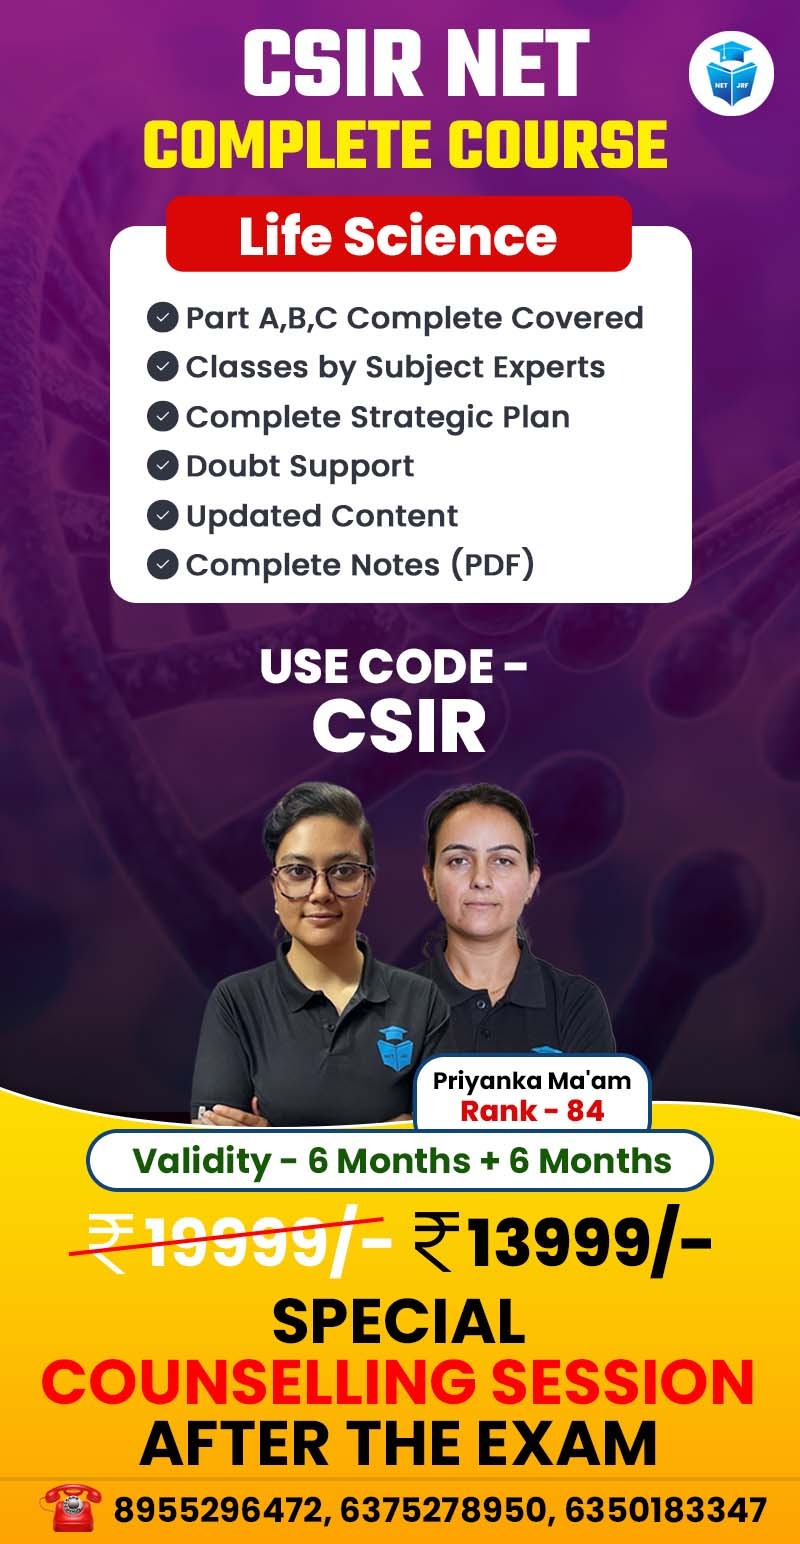 CSIR NET COMPLETE COURSE (LIFE SCIENCE)